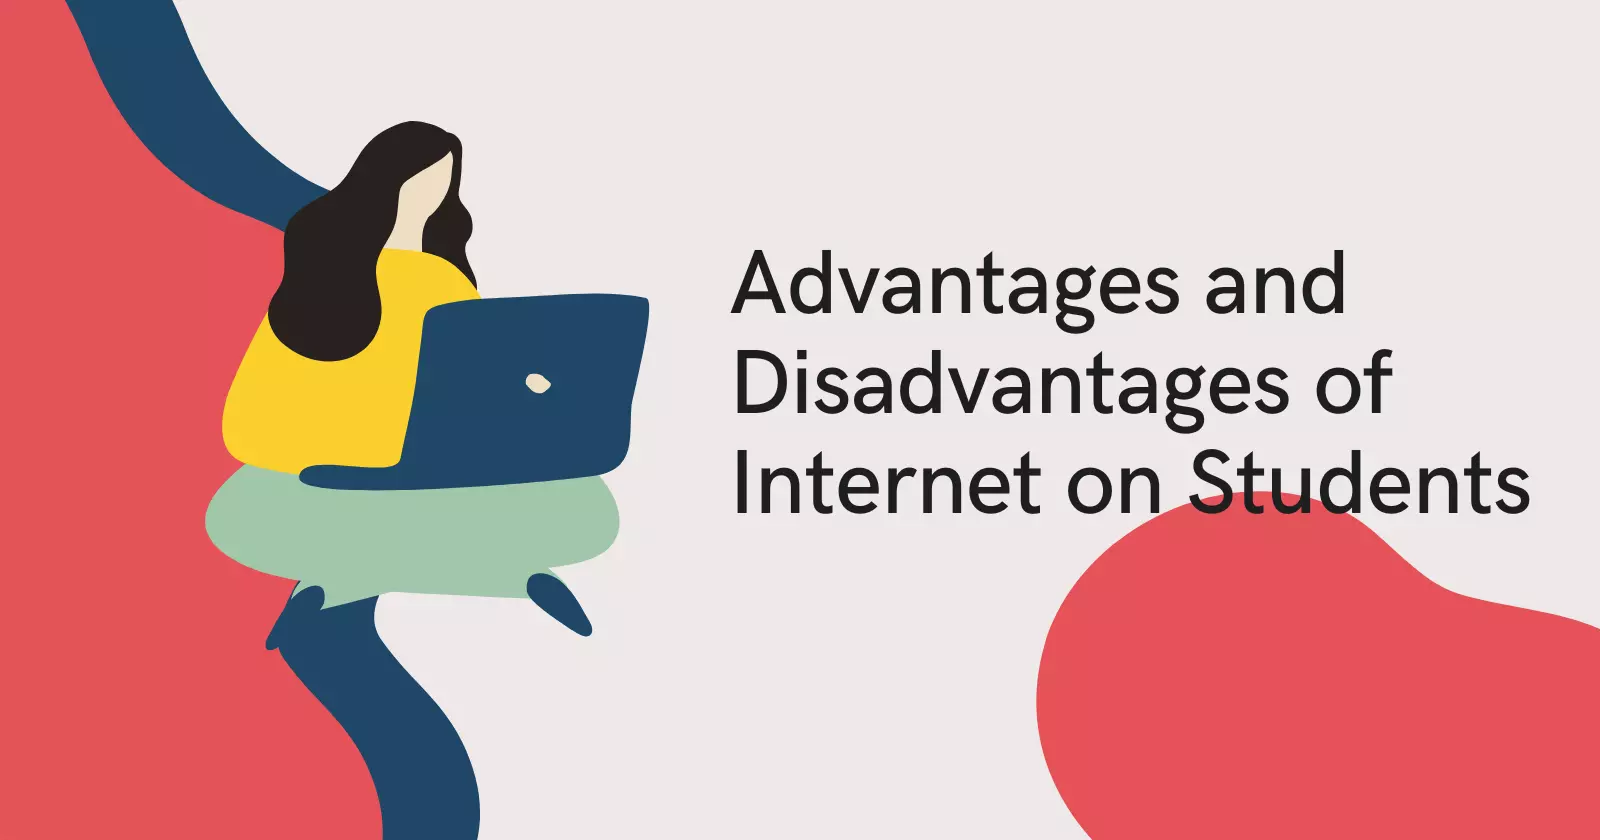 disadvantages of internet for youth